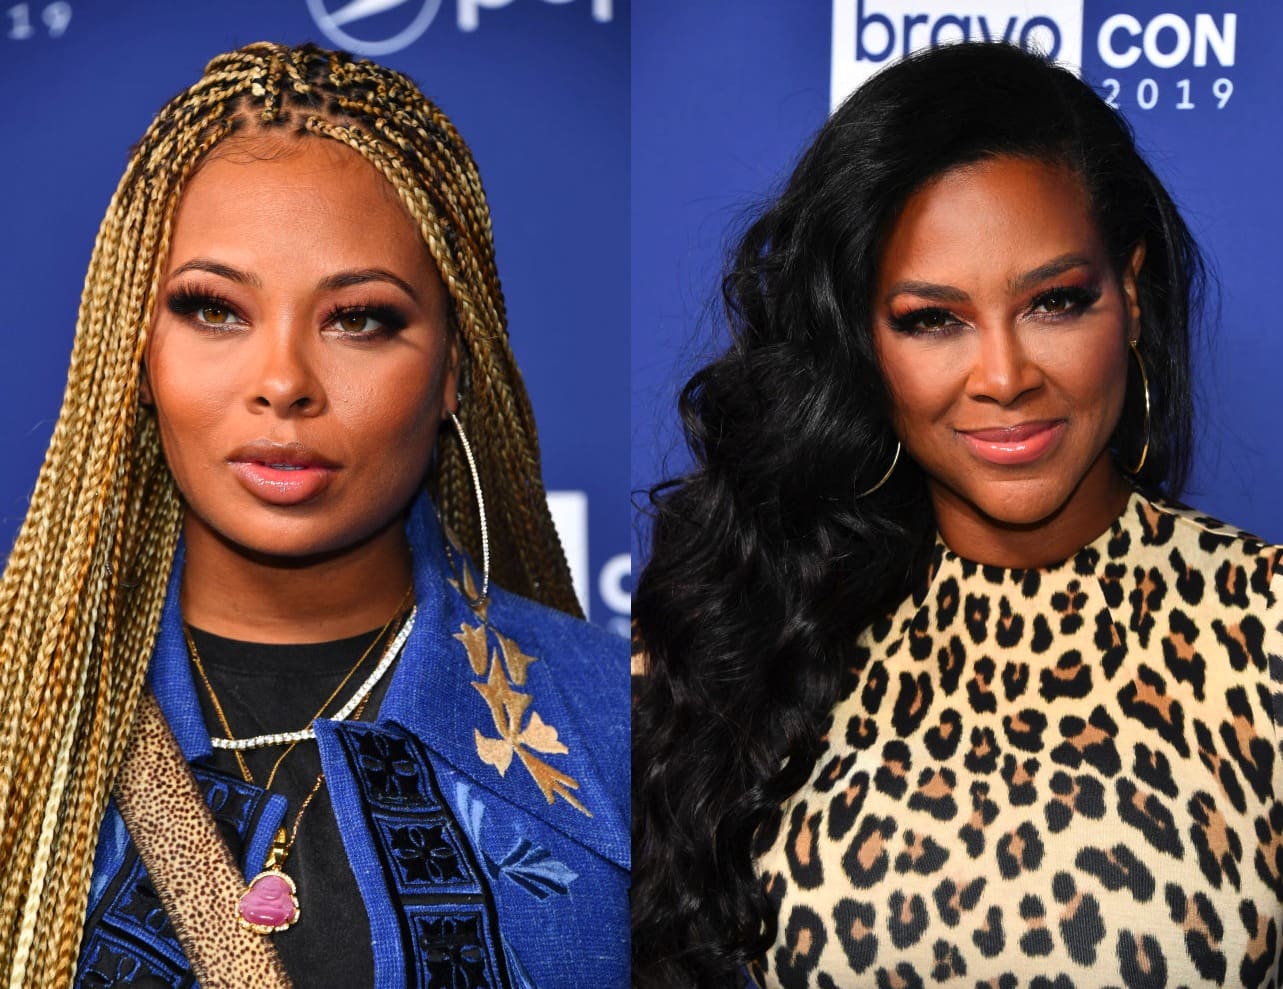 Eva Marcille Celebrates The Birthday Of Her Beautiful Baby Boy, Maverick - See The Celebration Video Featuring Kenya Moore's Baby Girl, Brookie!